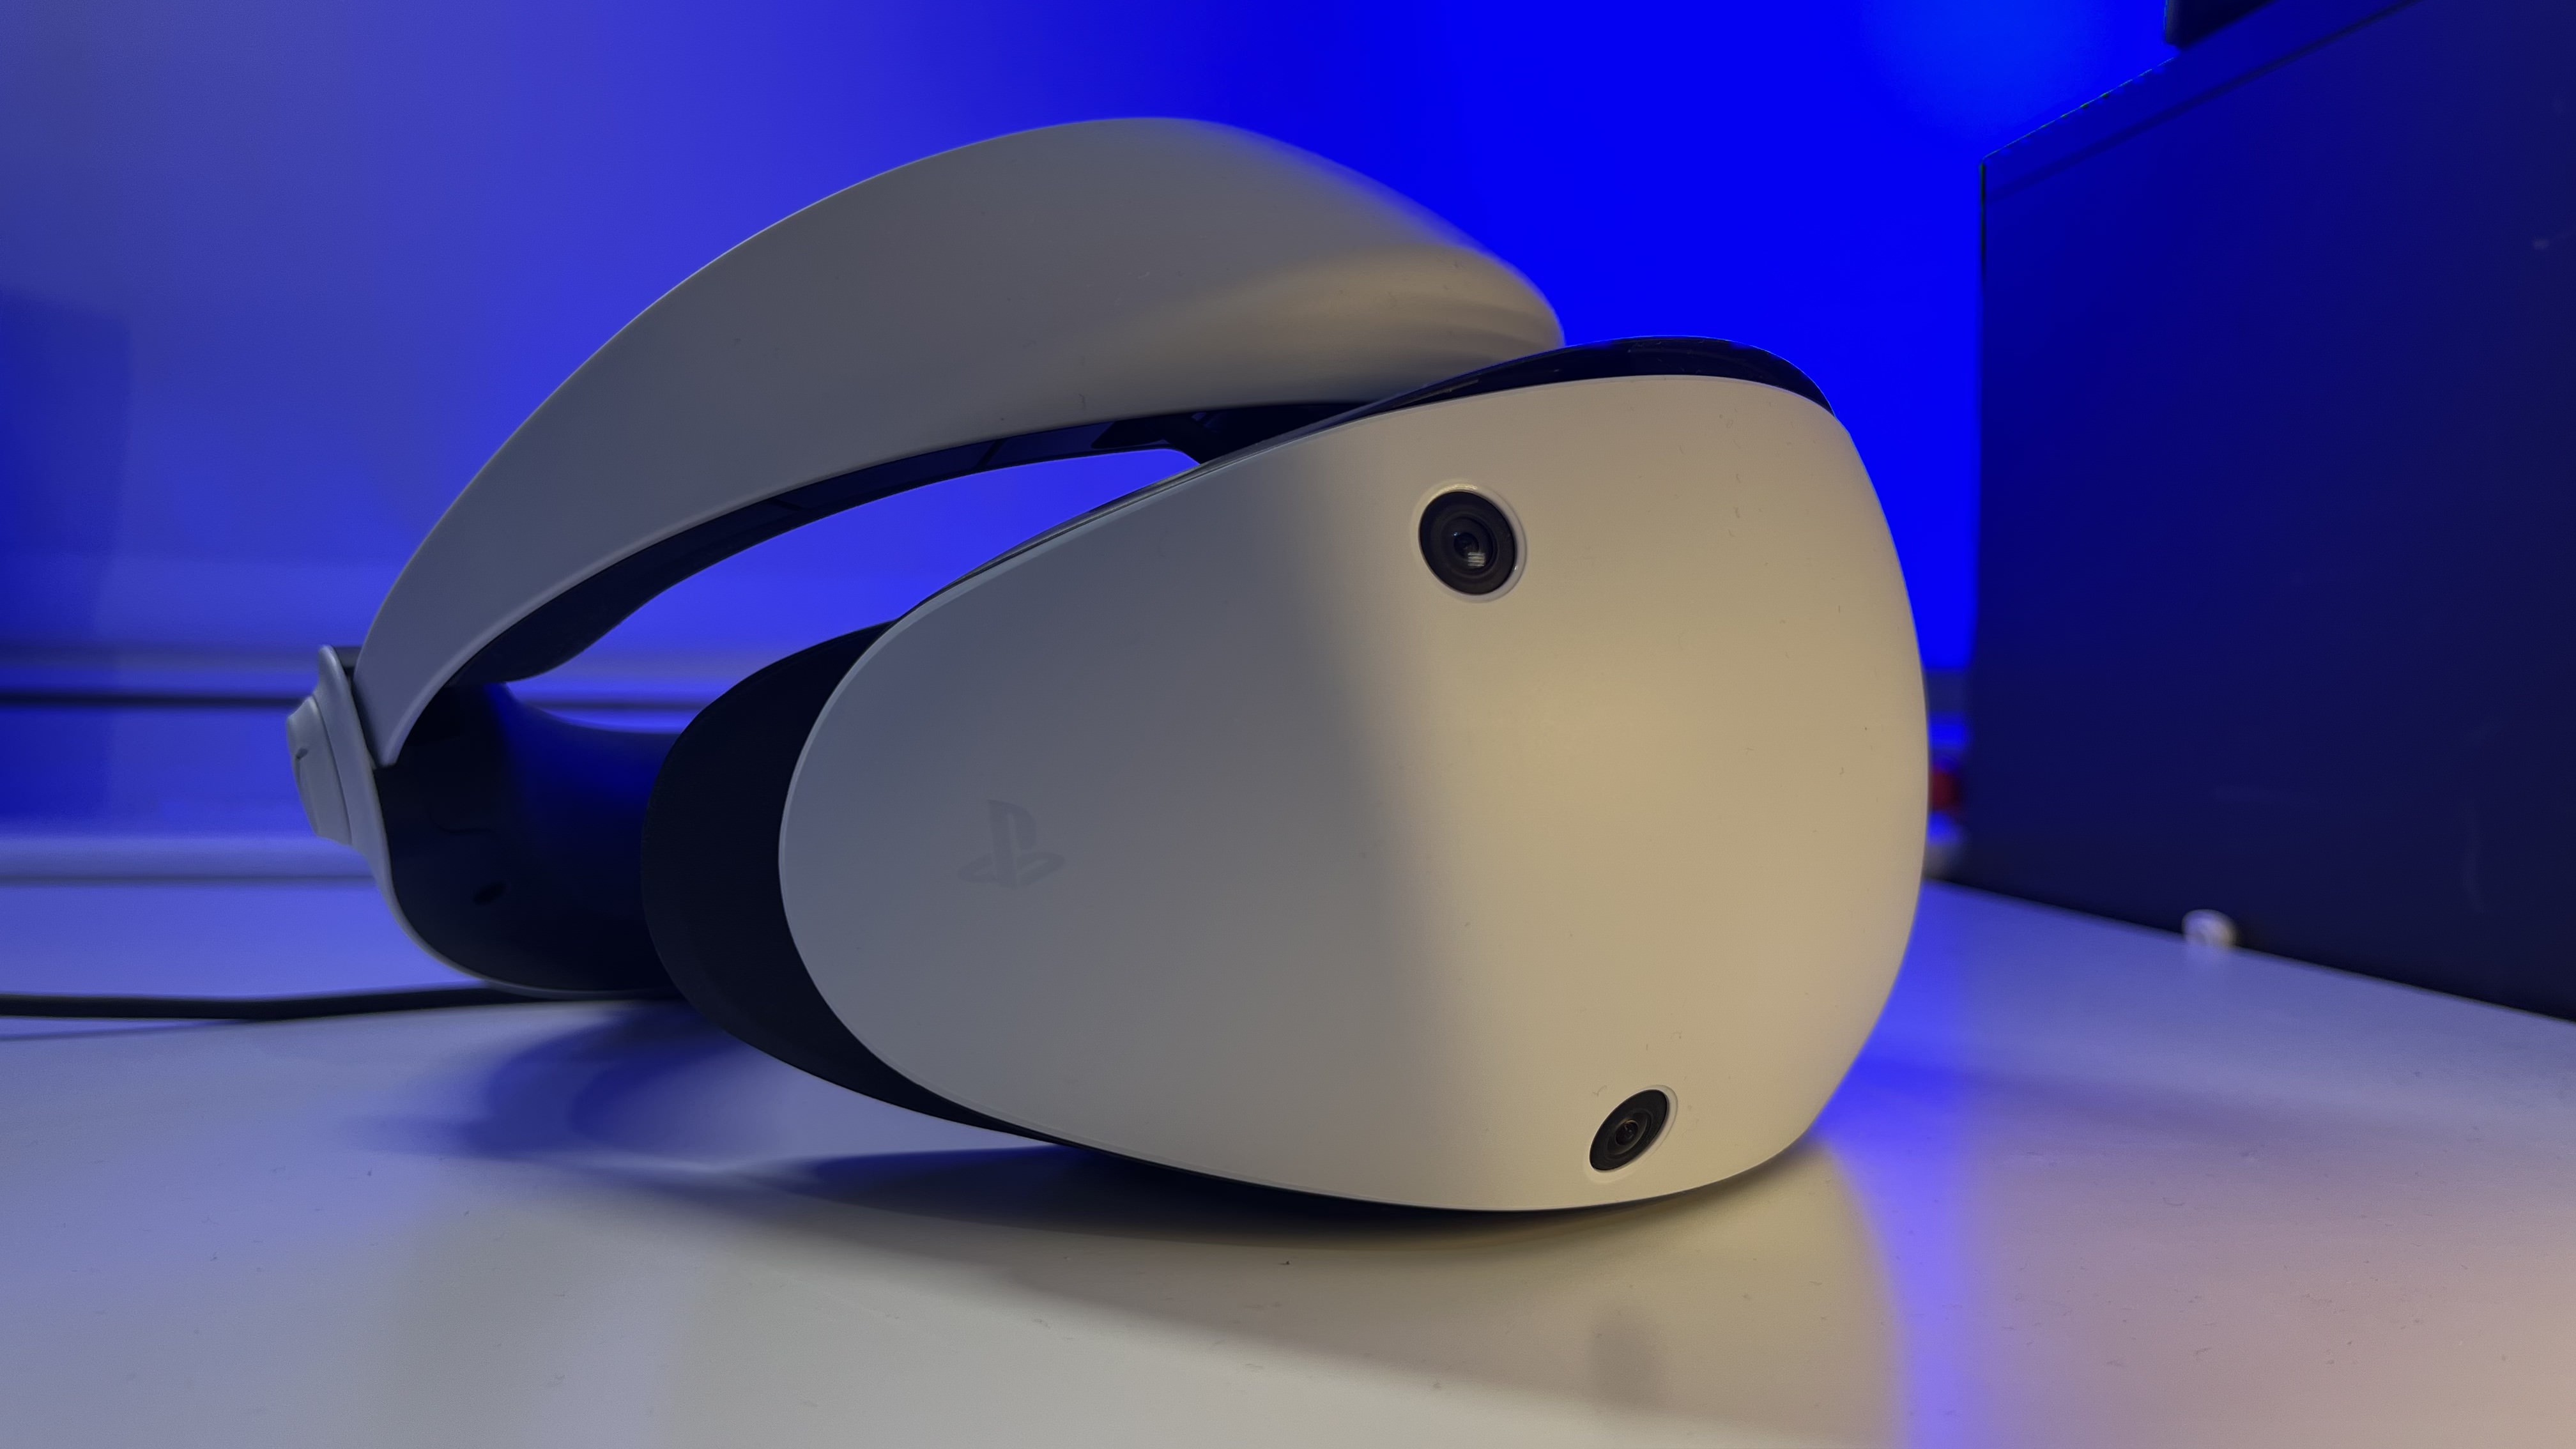 PlayStation VR2 review: A great headset that should be cheaper